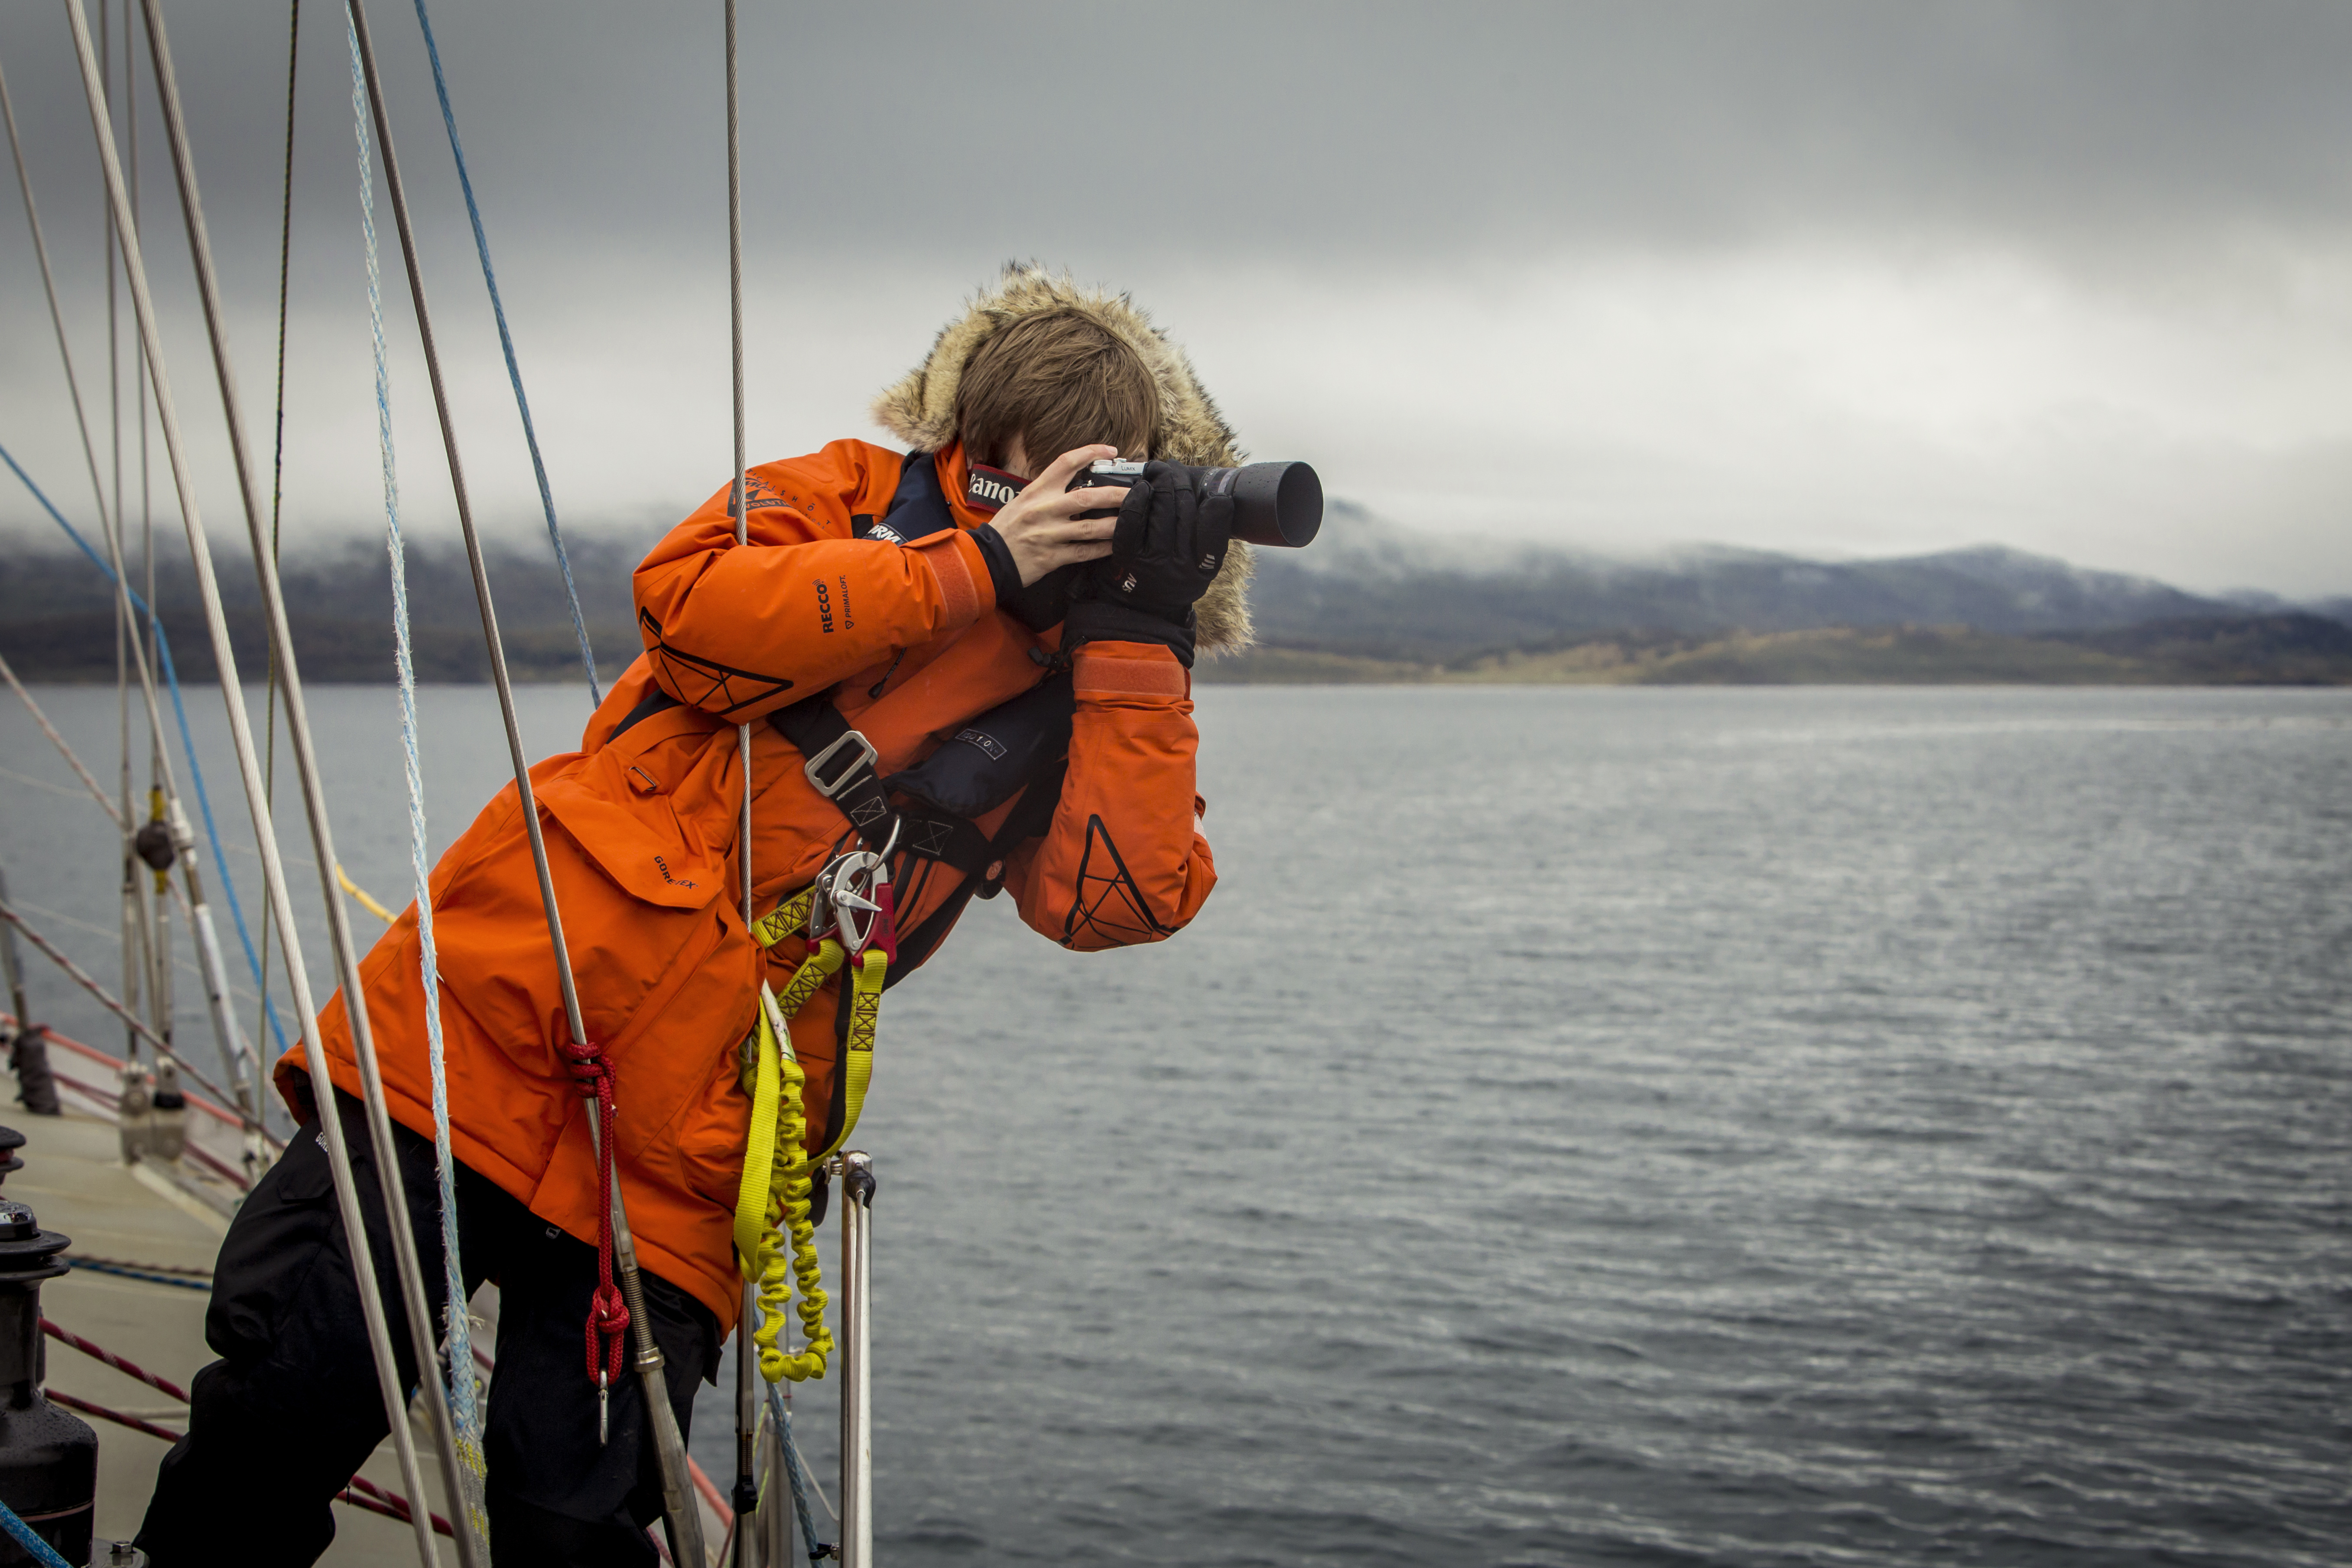 MUSTO competition to win an adventure photography trip of a lifetime